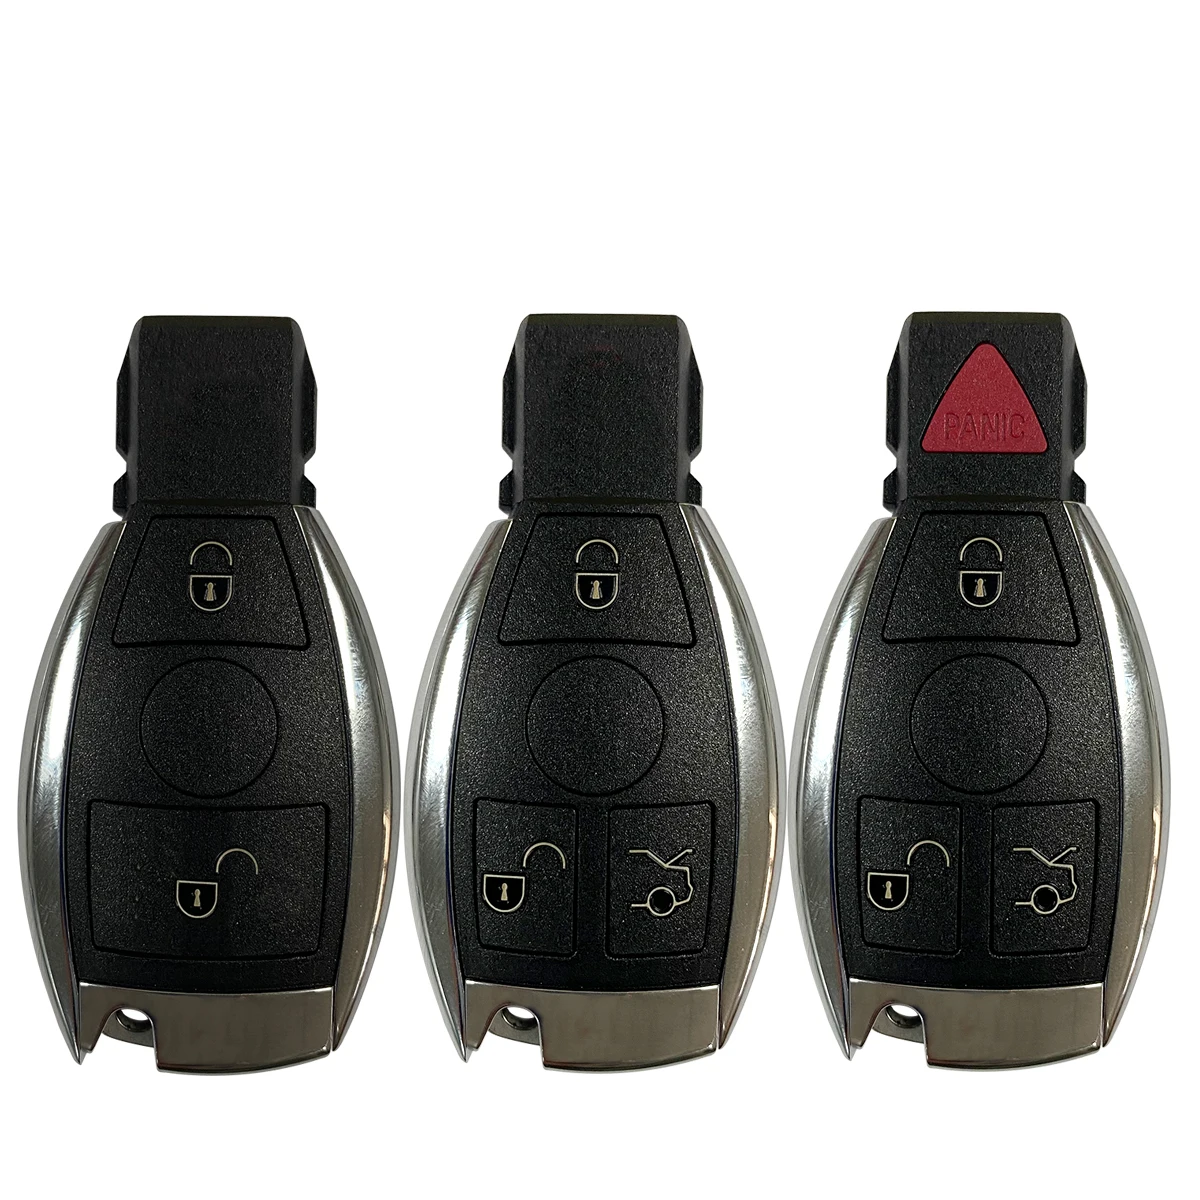 Okey Remote Control Car Key Shell Replacement  For Mercedes Benz Year 2000+ C E S Class Supports Original NEC/BGA  2/3/4 Buttons okey remote control car key shell replacement for mercedes benz year 2000 c e s class supports original nec bga 2 3 4 buttons